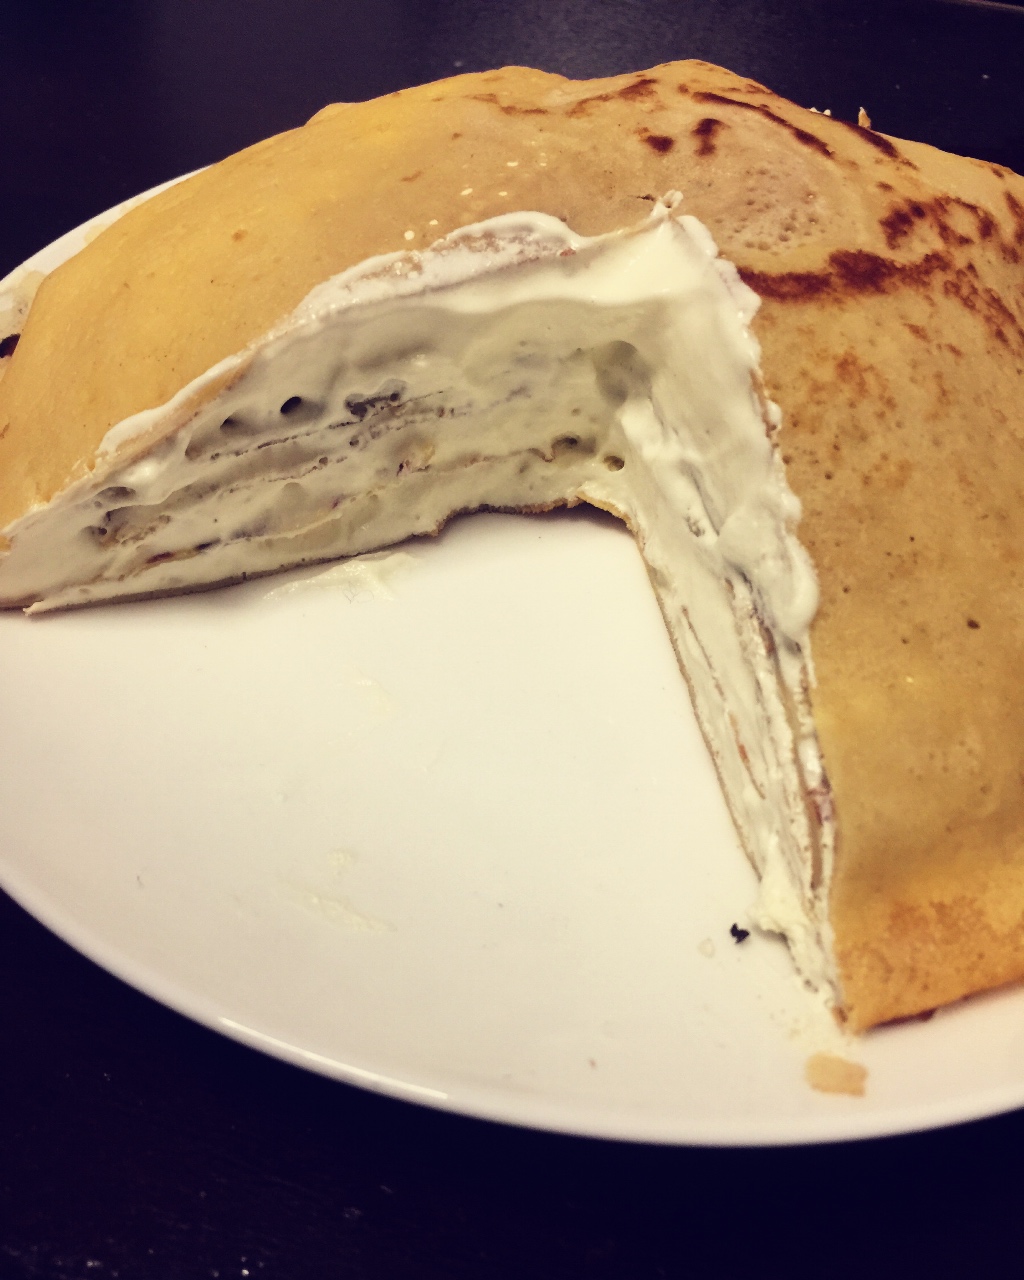 LADY M 抹茶千层可丽饼/千层蛋糕 Green Tea Mille Crepes